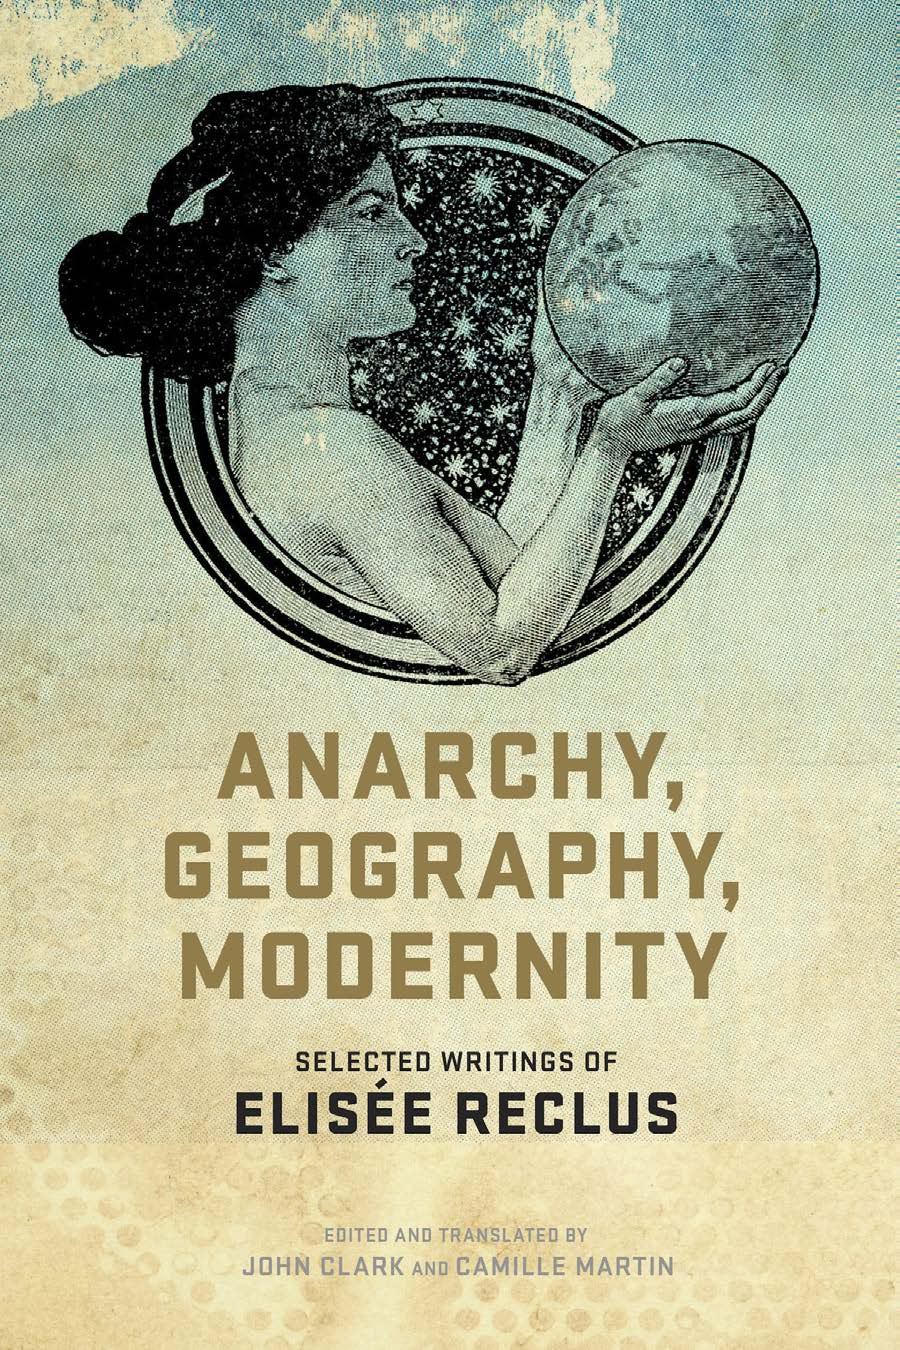 e-r-elisee-reclus-anarchy-geography-modernity-1.png